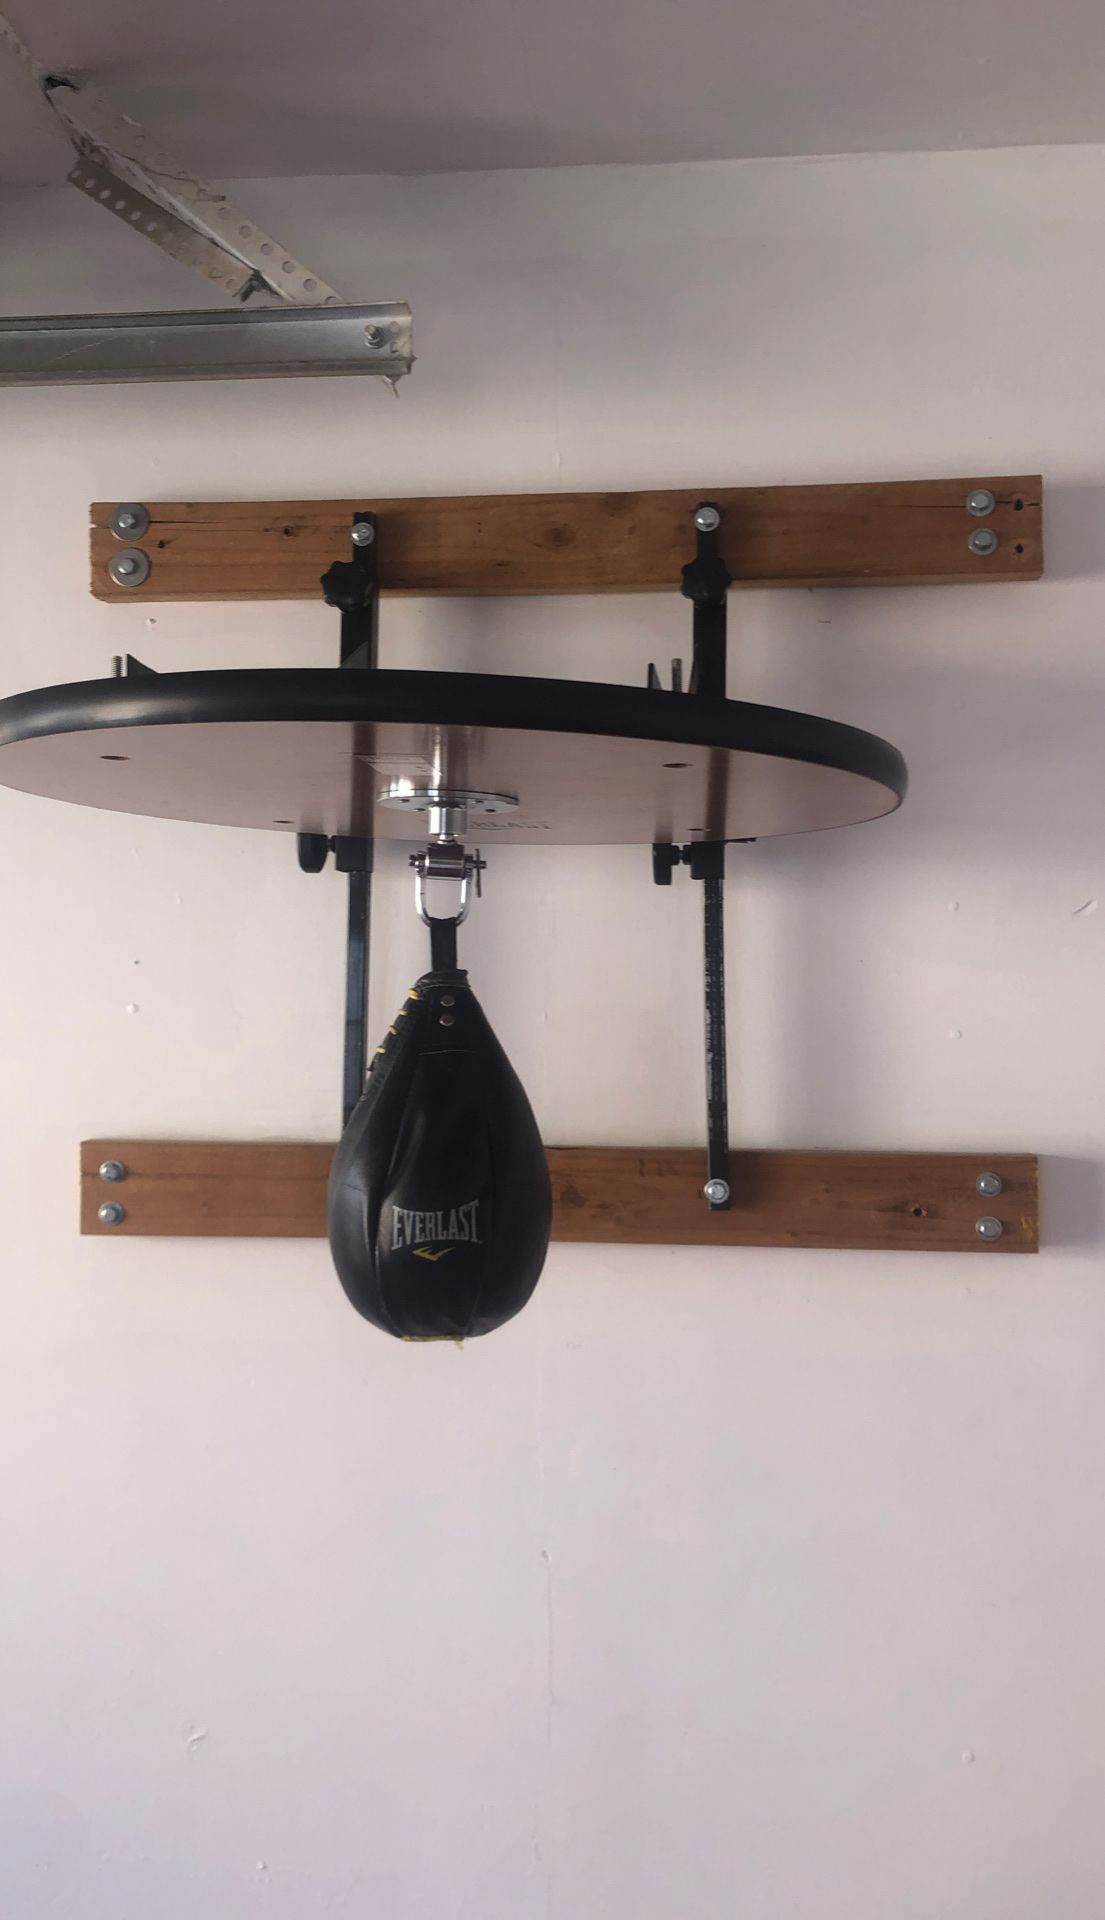 Speed bag wall mount with speed bag